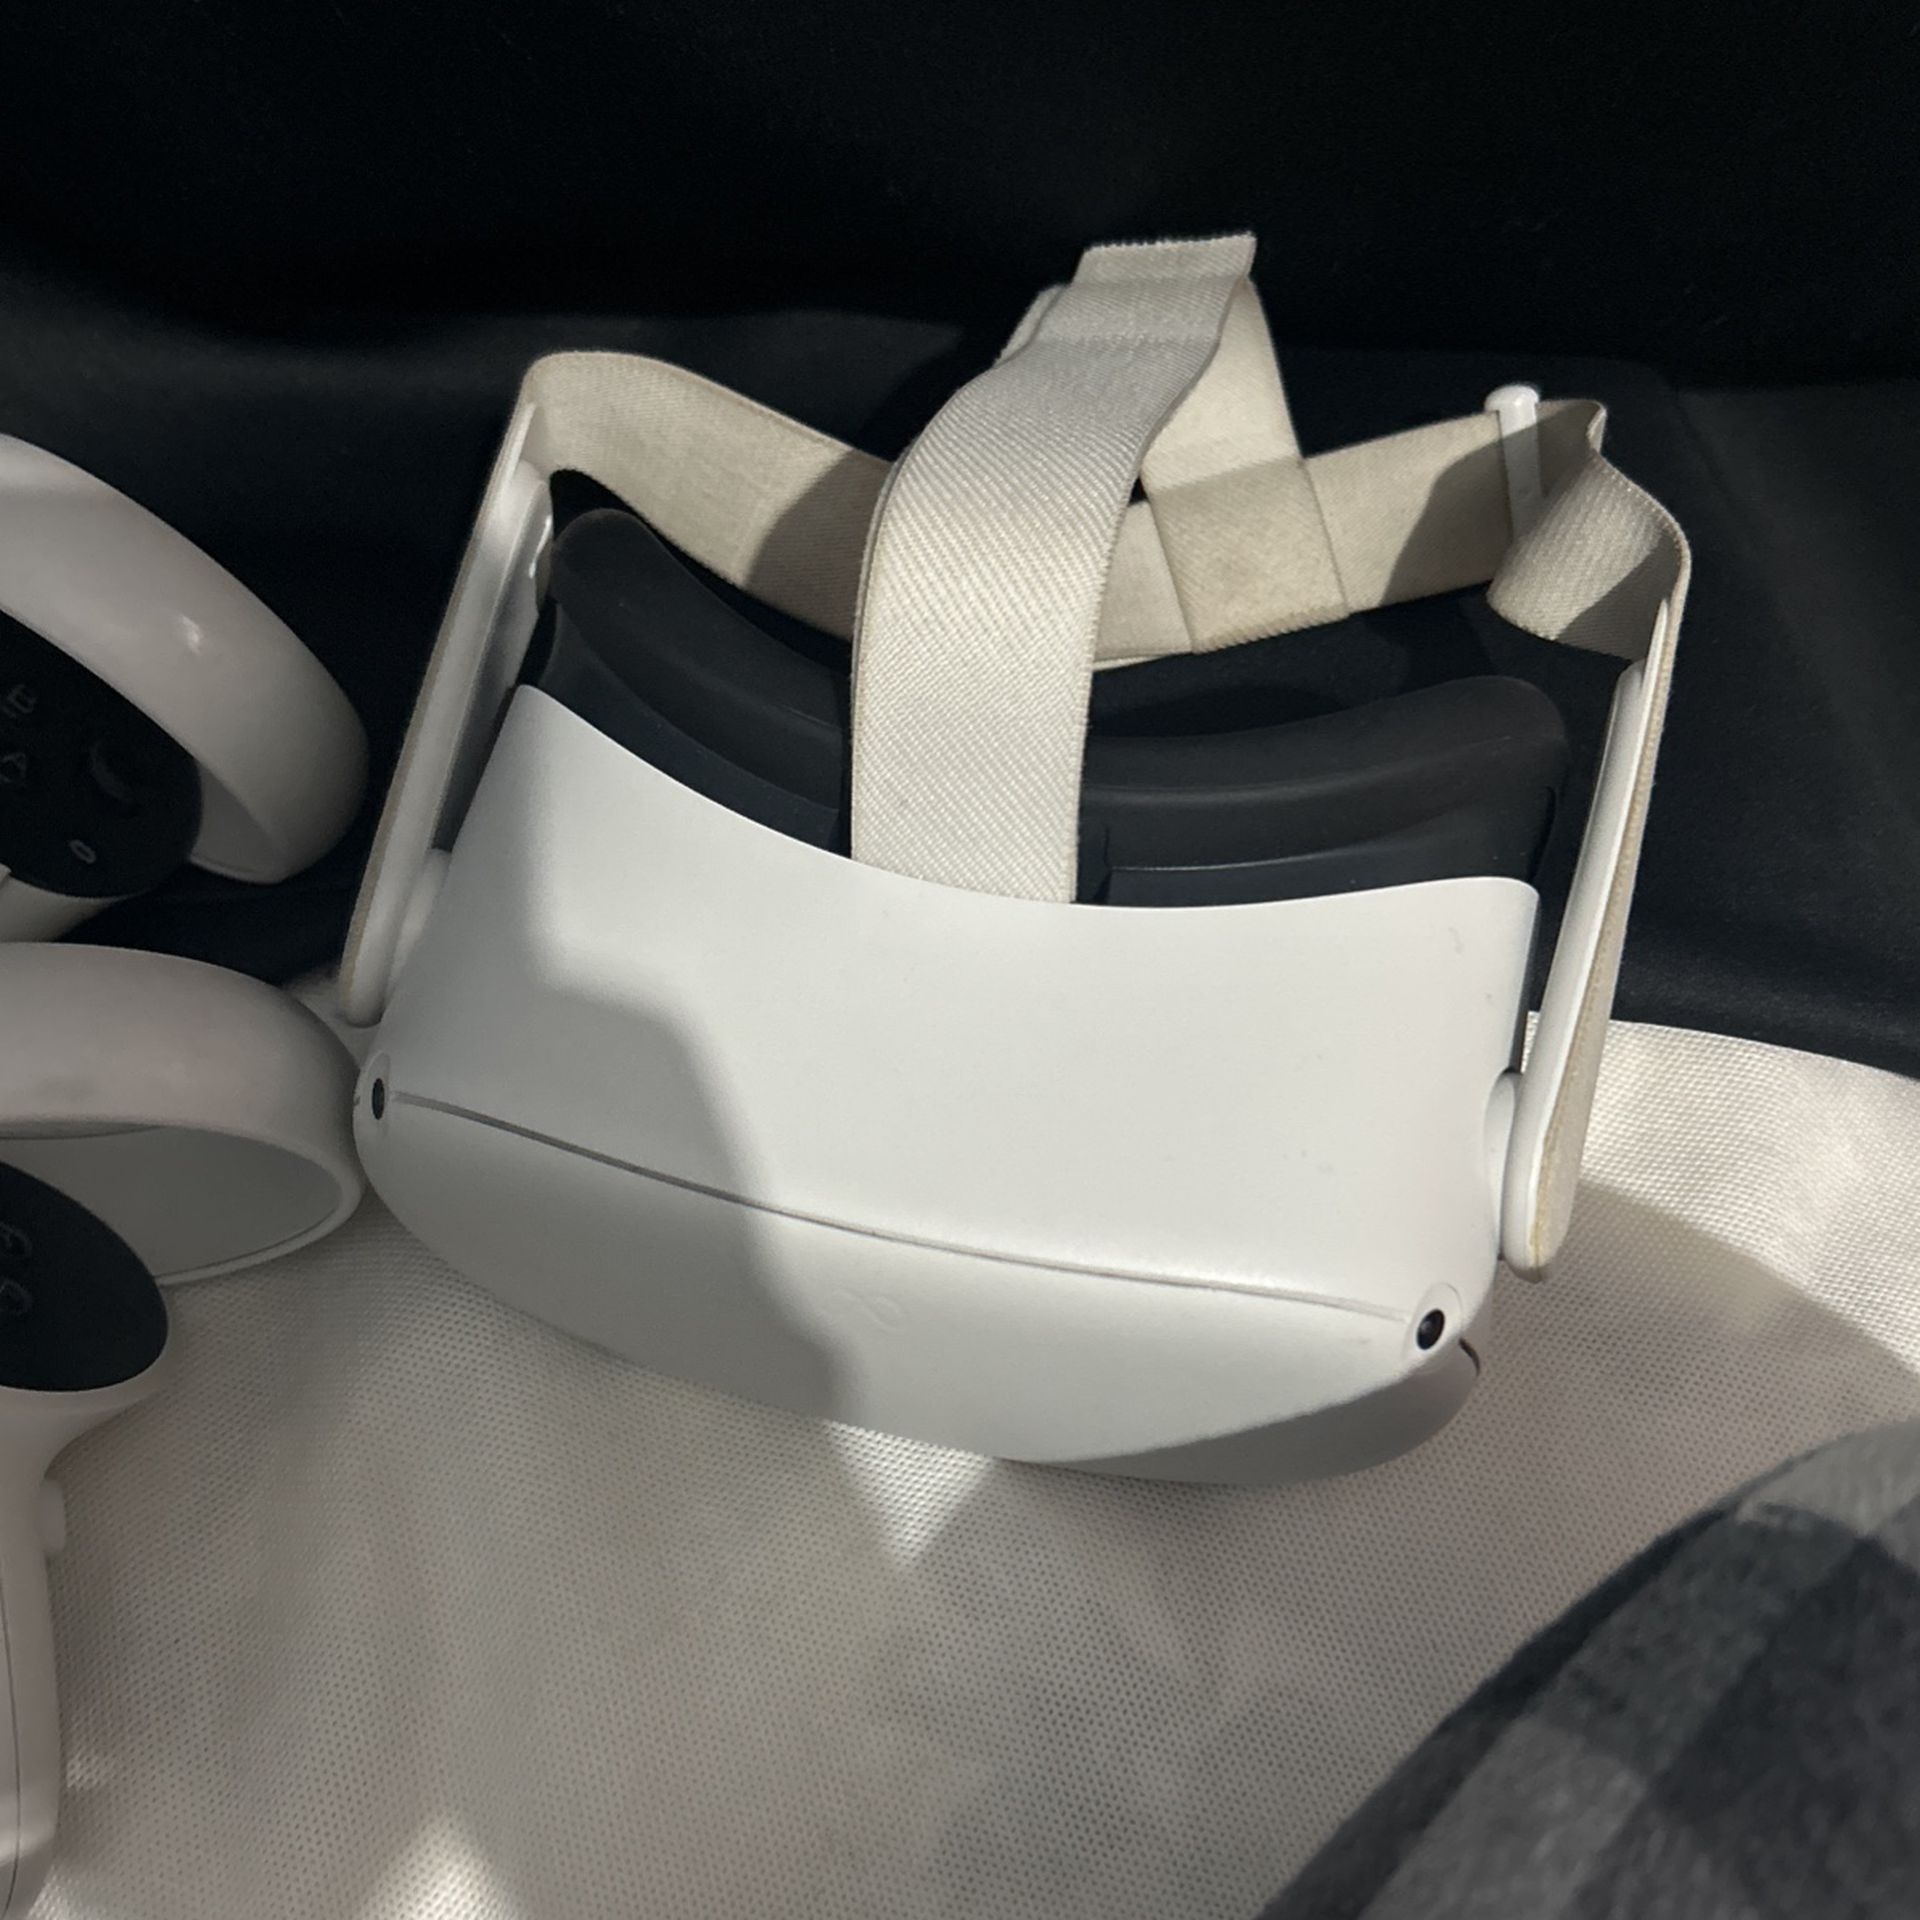 Used oculus Quest 2 ($120 Or  Trade For Anything But It Has To Have Value) 